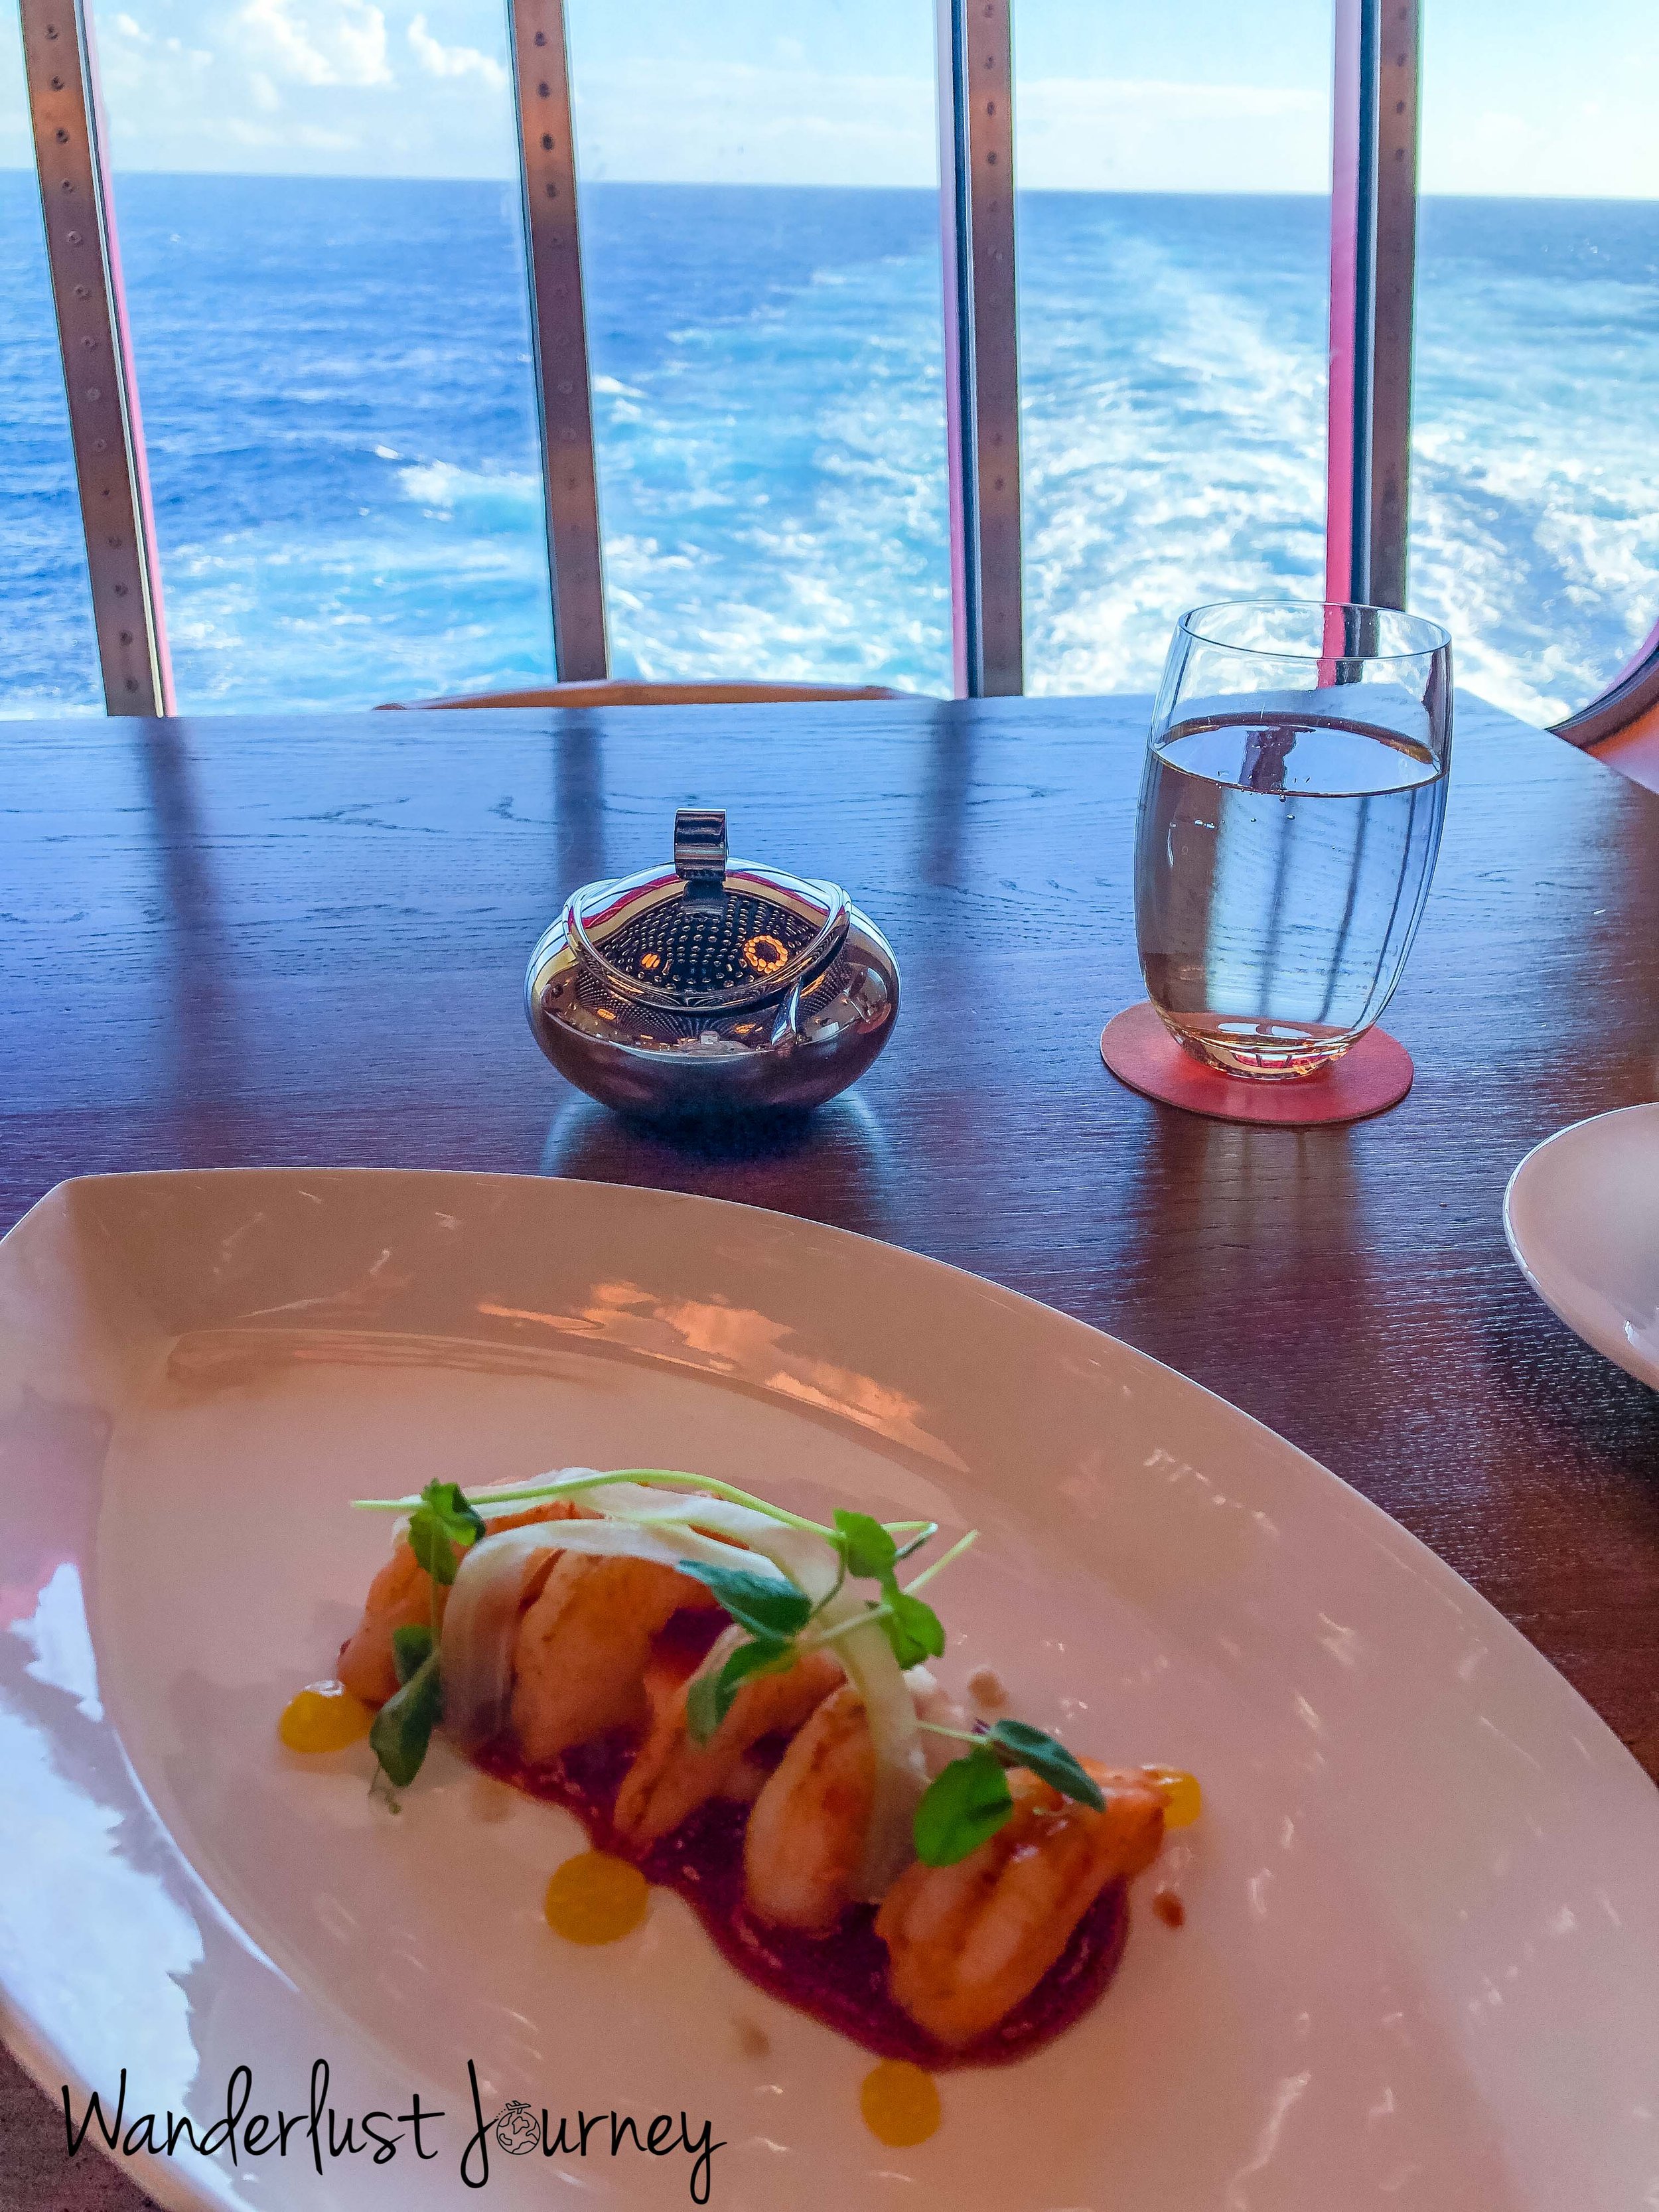 Virgin Voyages Restaurants and Dining on Scarlet Lady — A Journey